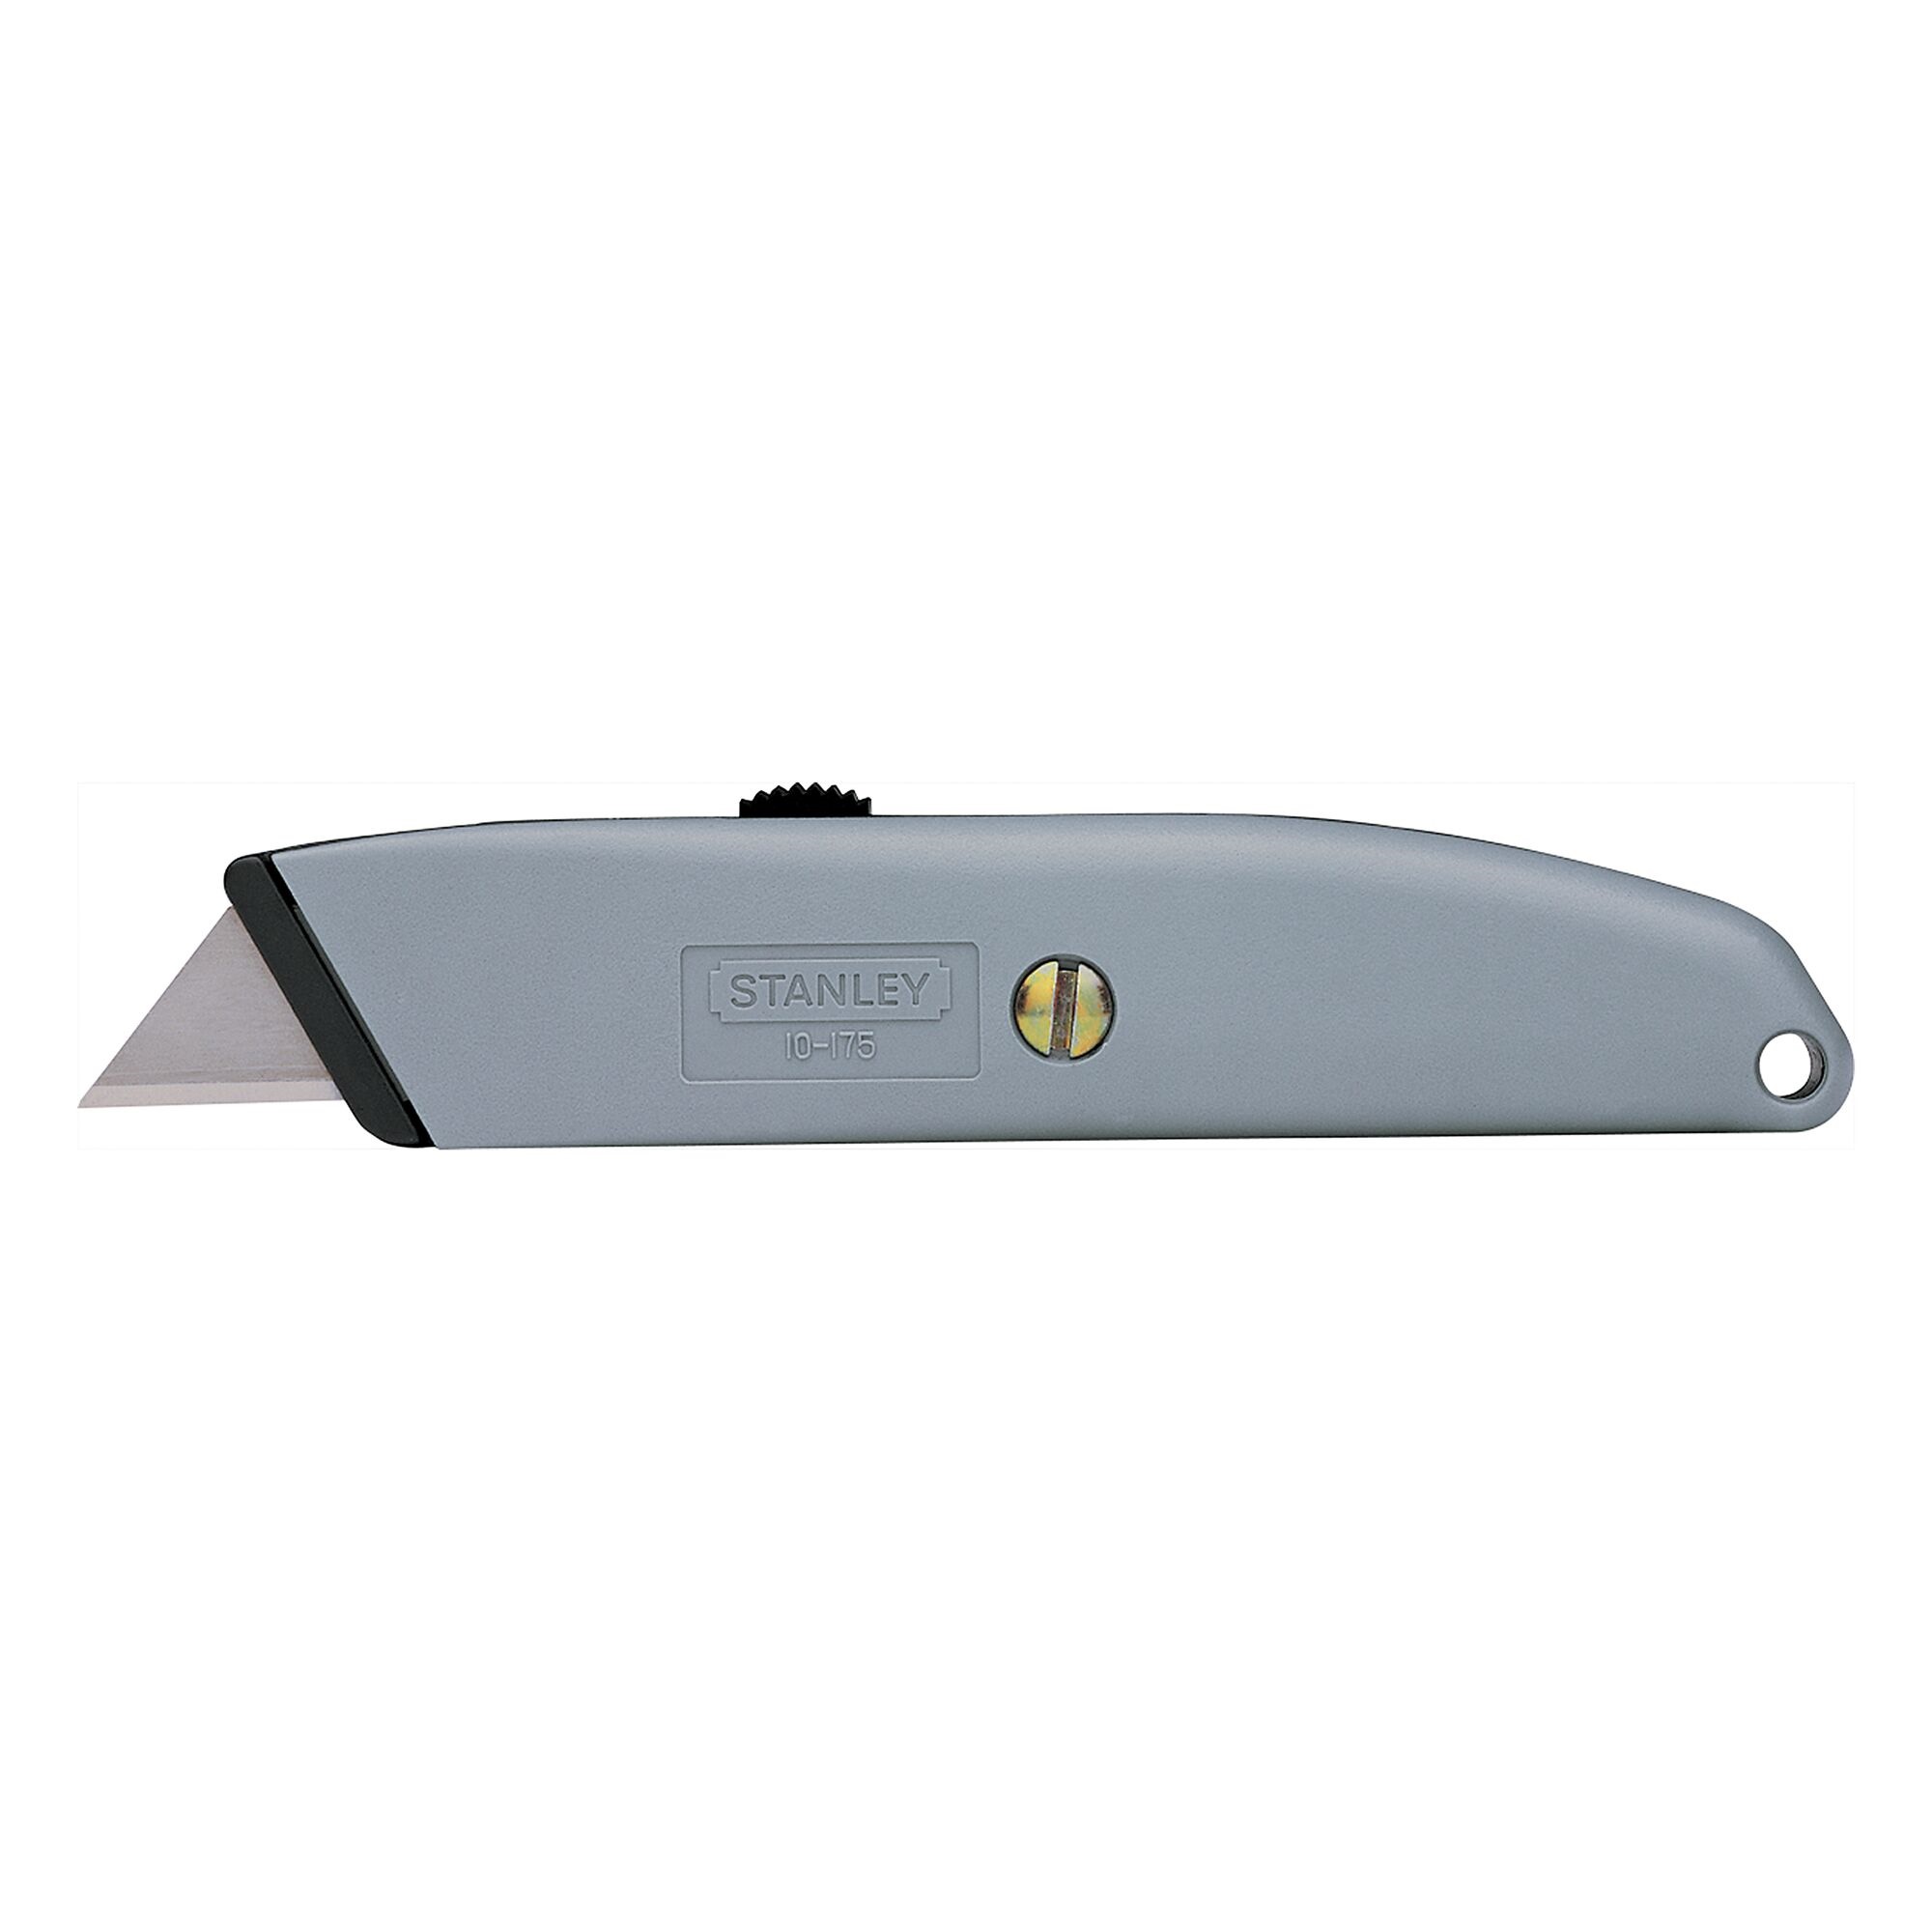 STANLEY STHT10430-0 RETRACTABLE BLADE KNIFE